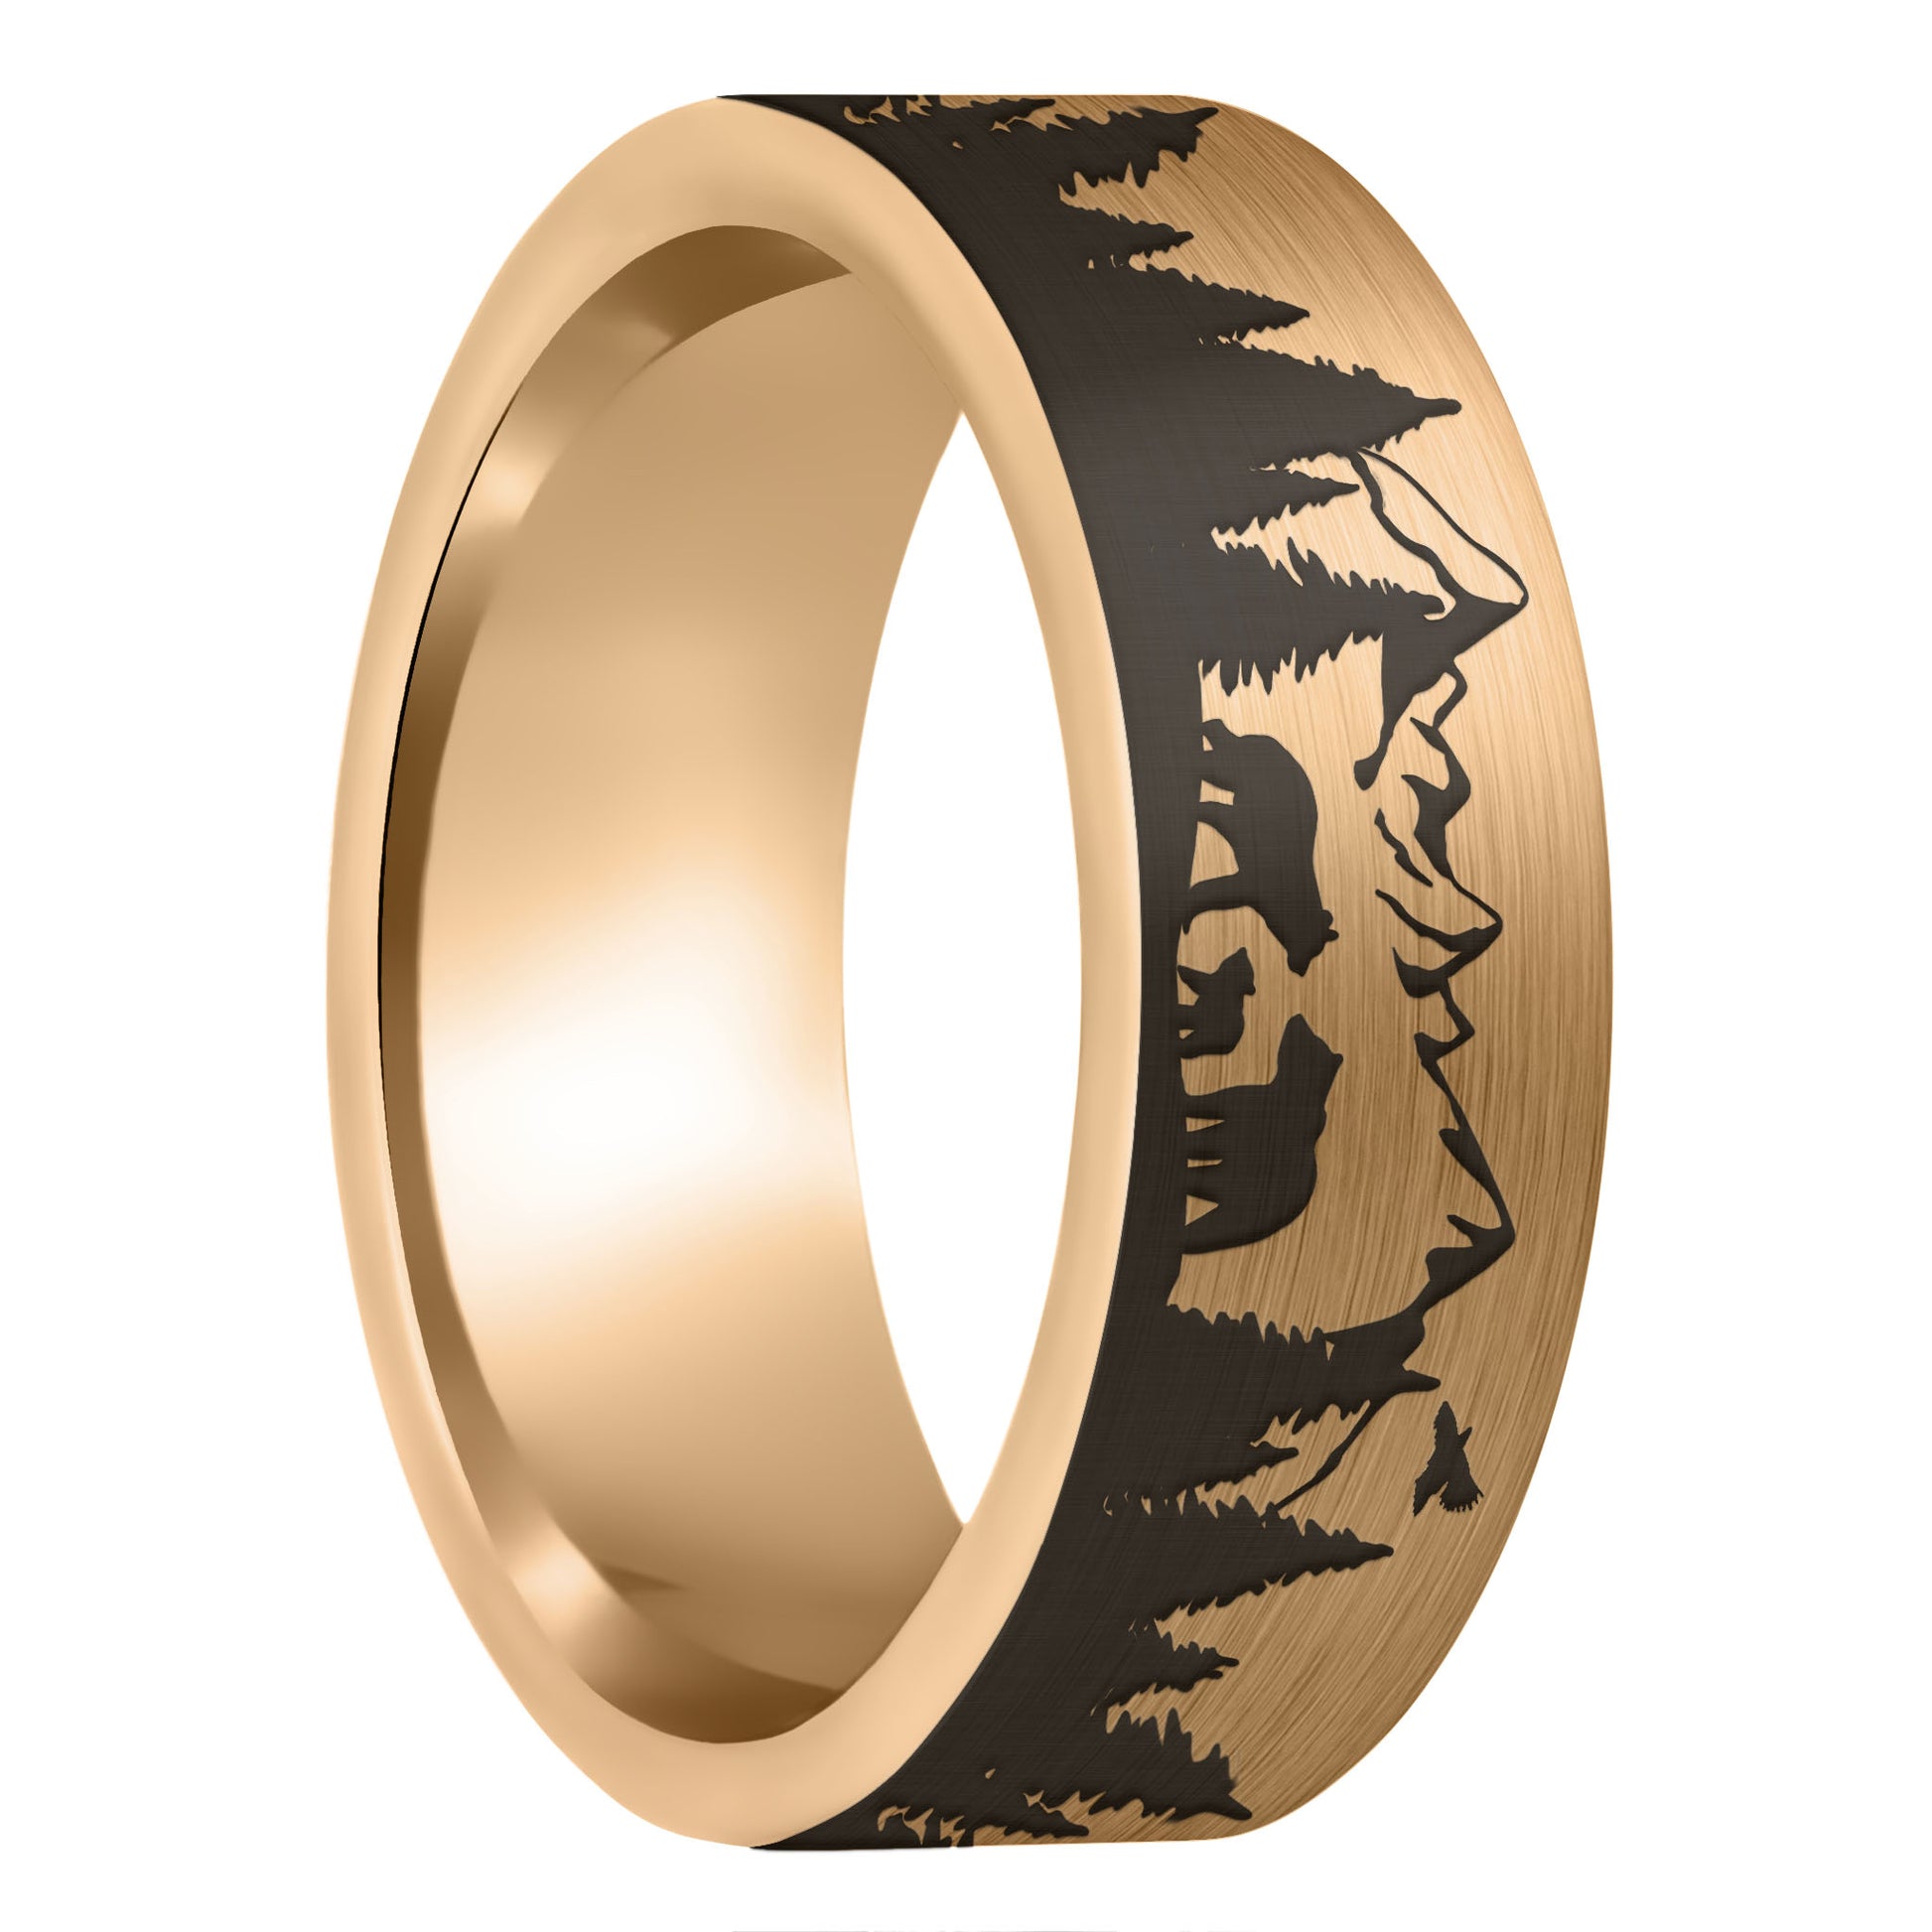 A bear & cubs landscape scene brushed rose gold tungsten men's wedding band displayed on a plain white background.